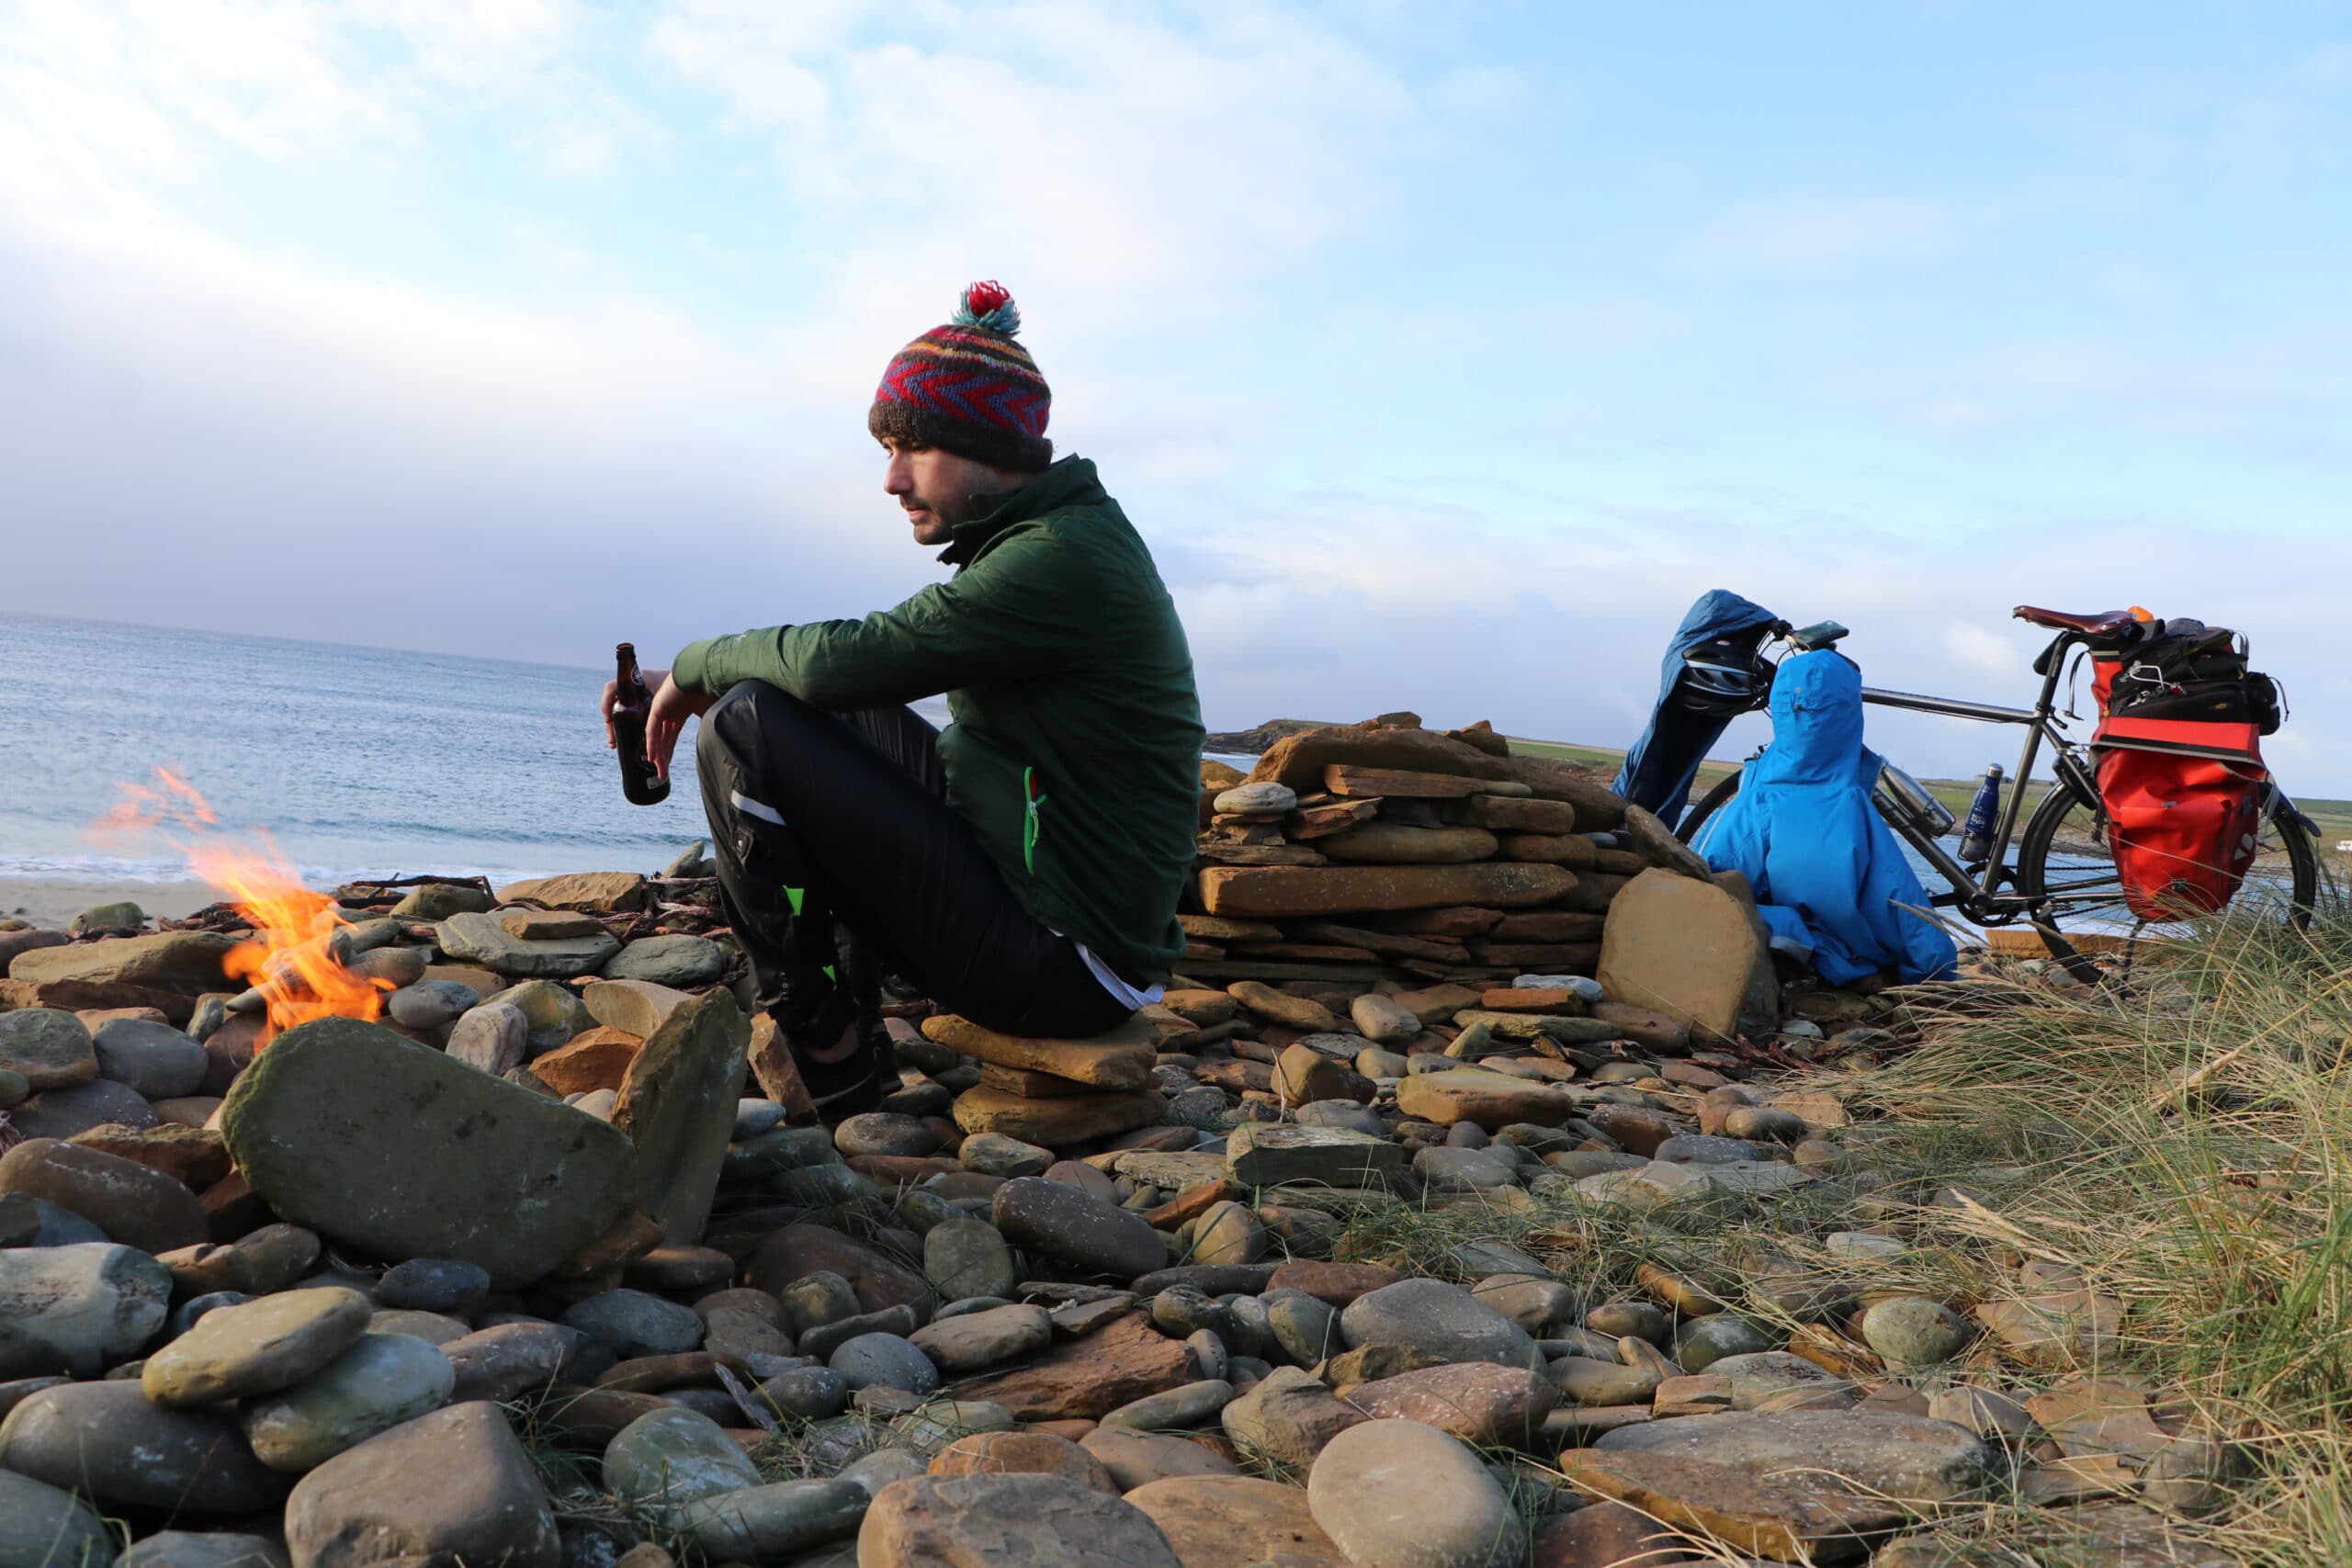 Person wearing a beanie hat sat on a pebble beach holding a bottle beside a fire, a bicycle stands in the background